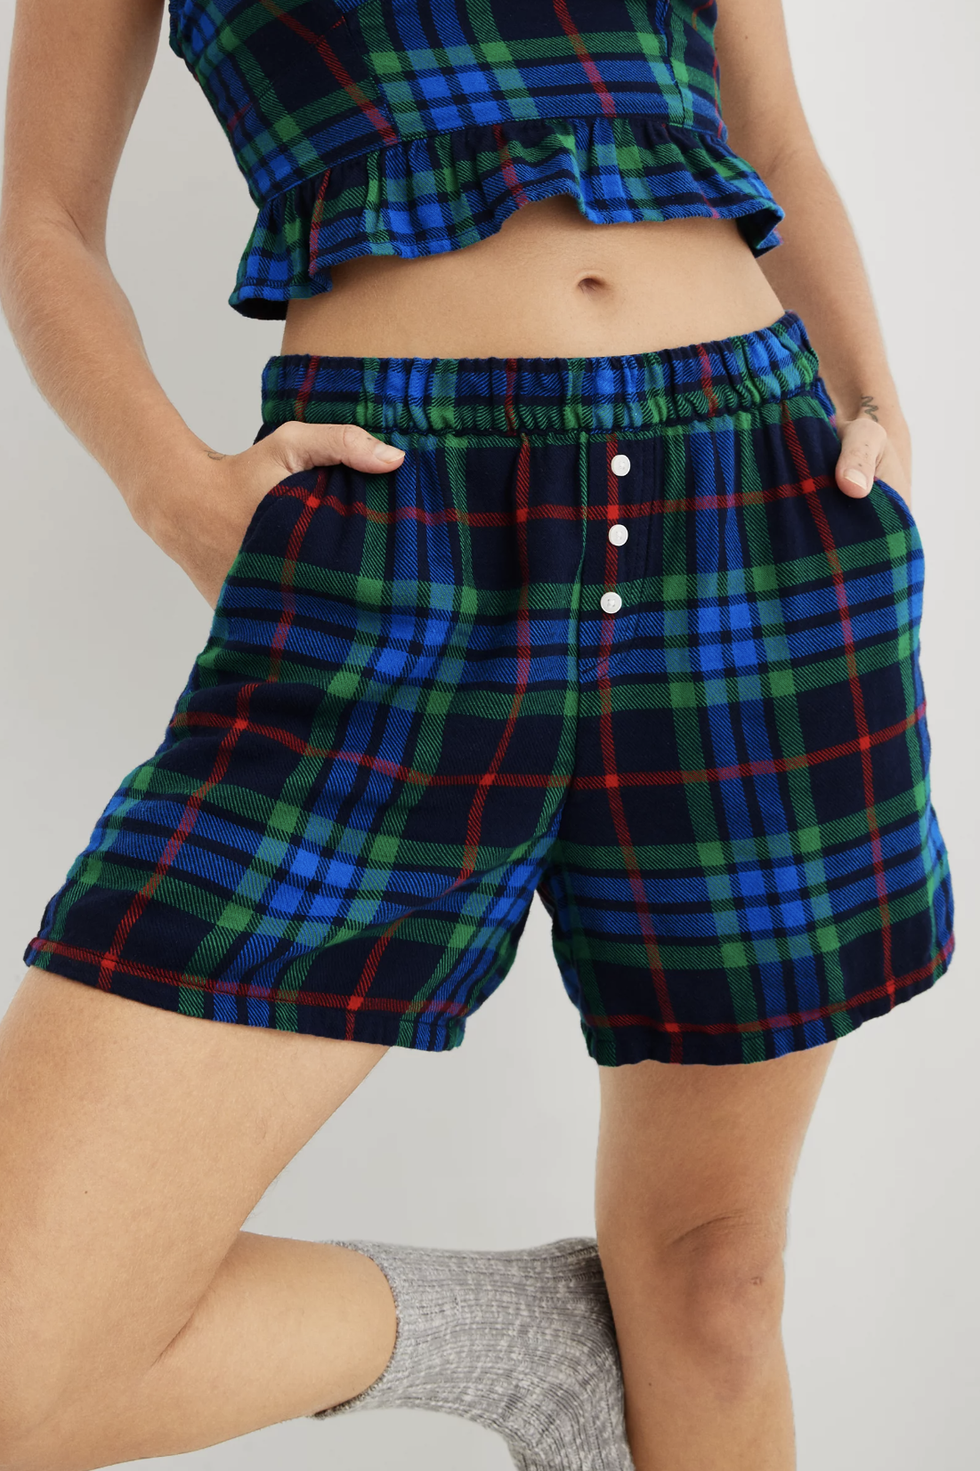 Flannel High Waisted Skater Pajama Boxer